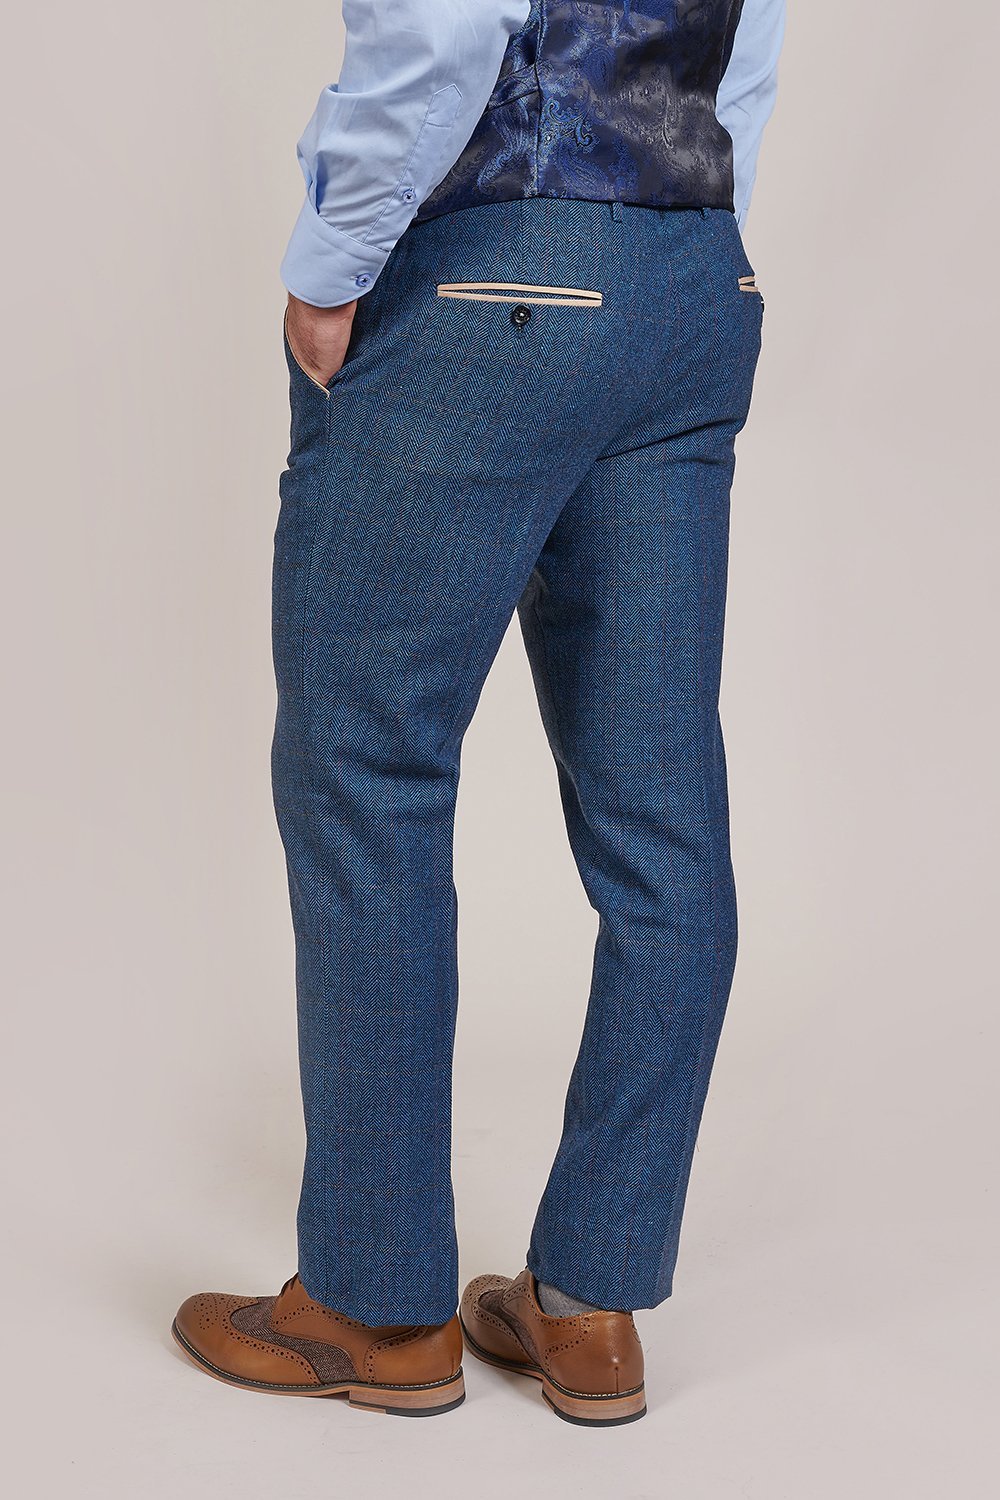 Marc Darcy - Dion Blue Tweed Trousers - Furbellow & Co